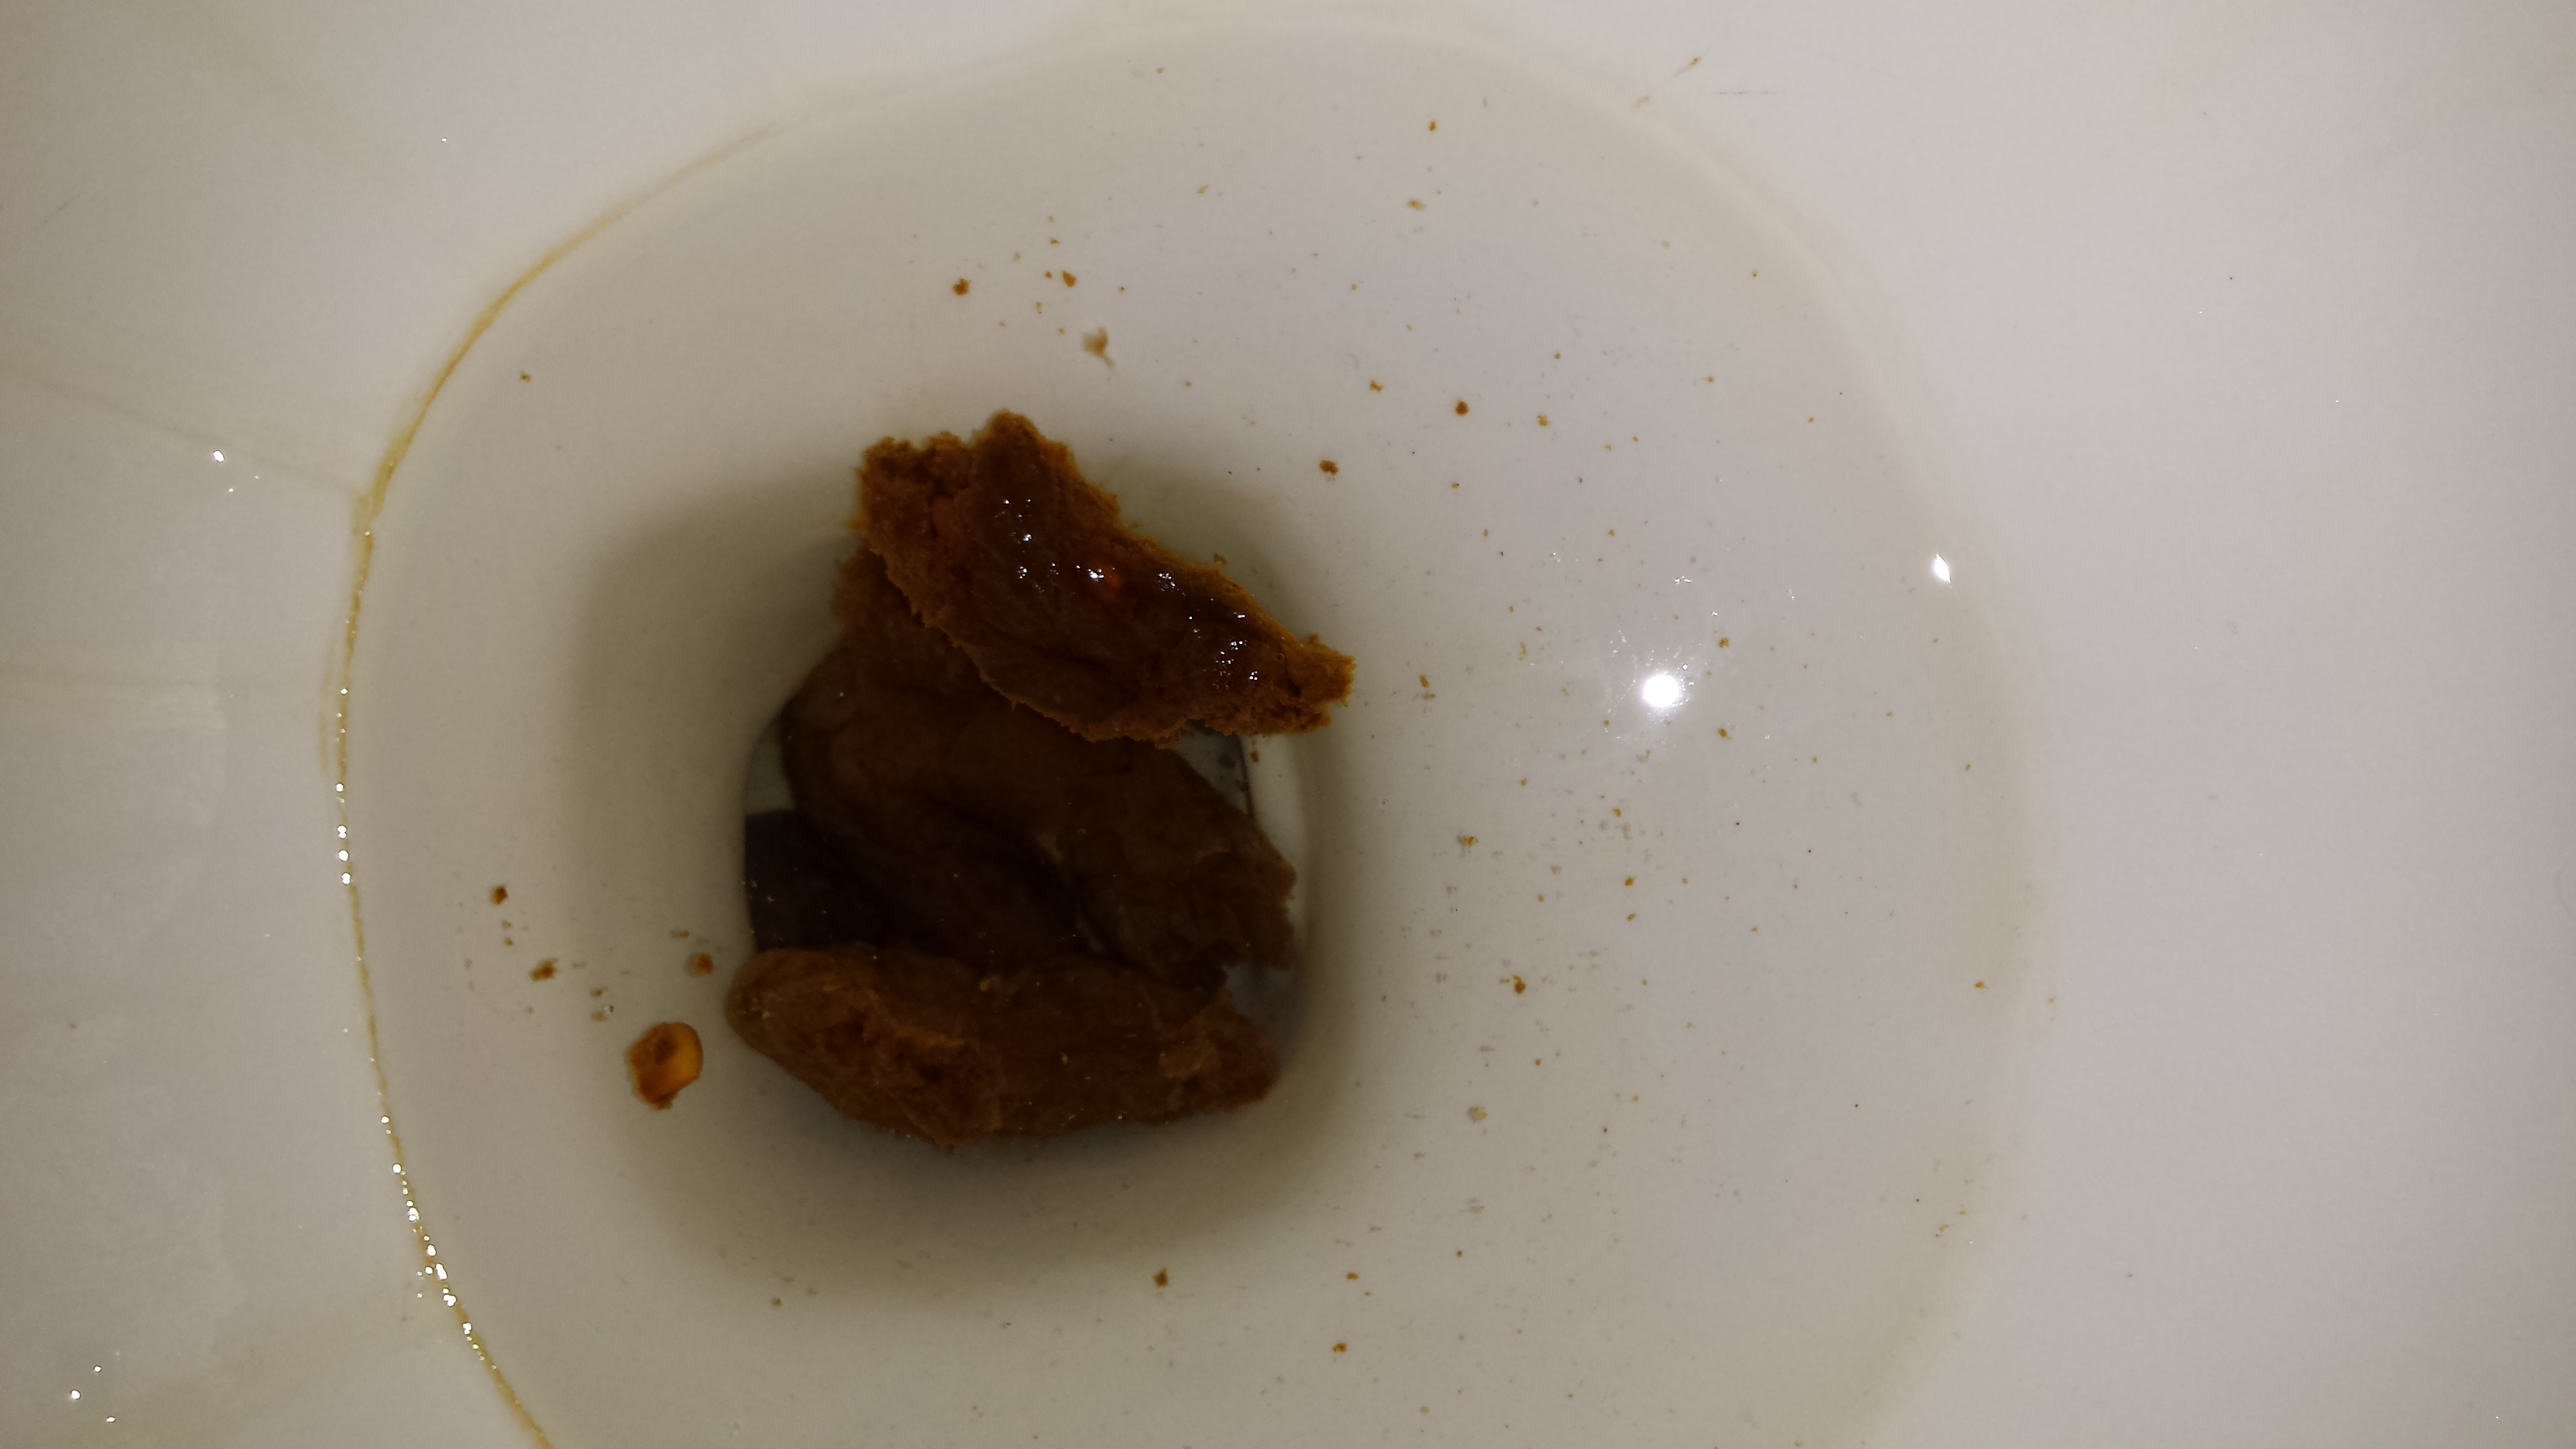 2nd after thanksgiving poop